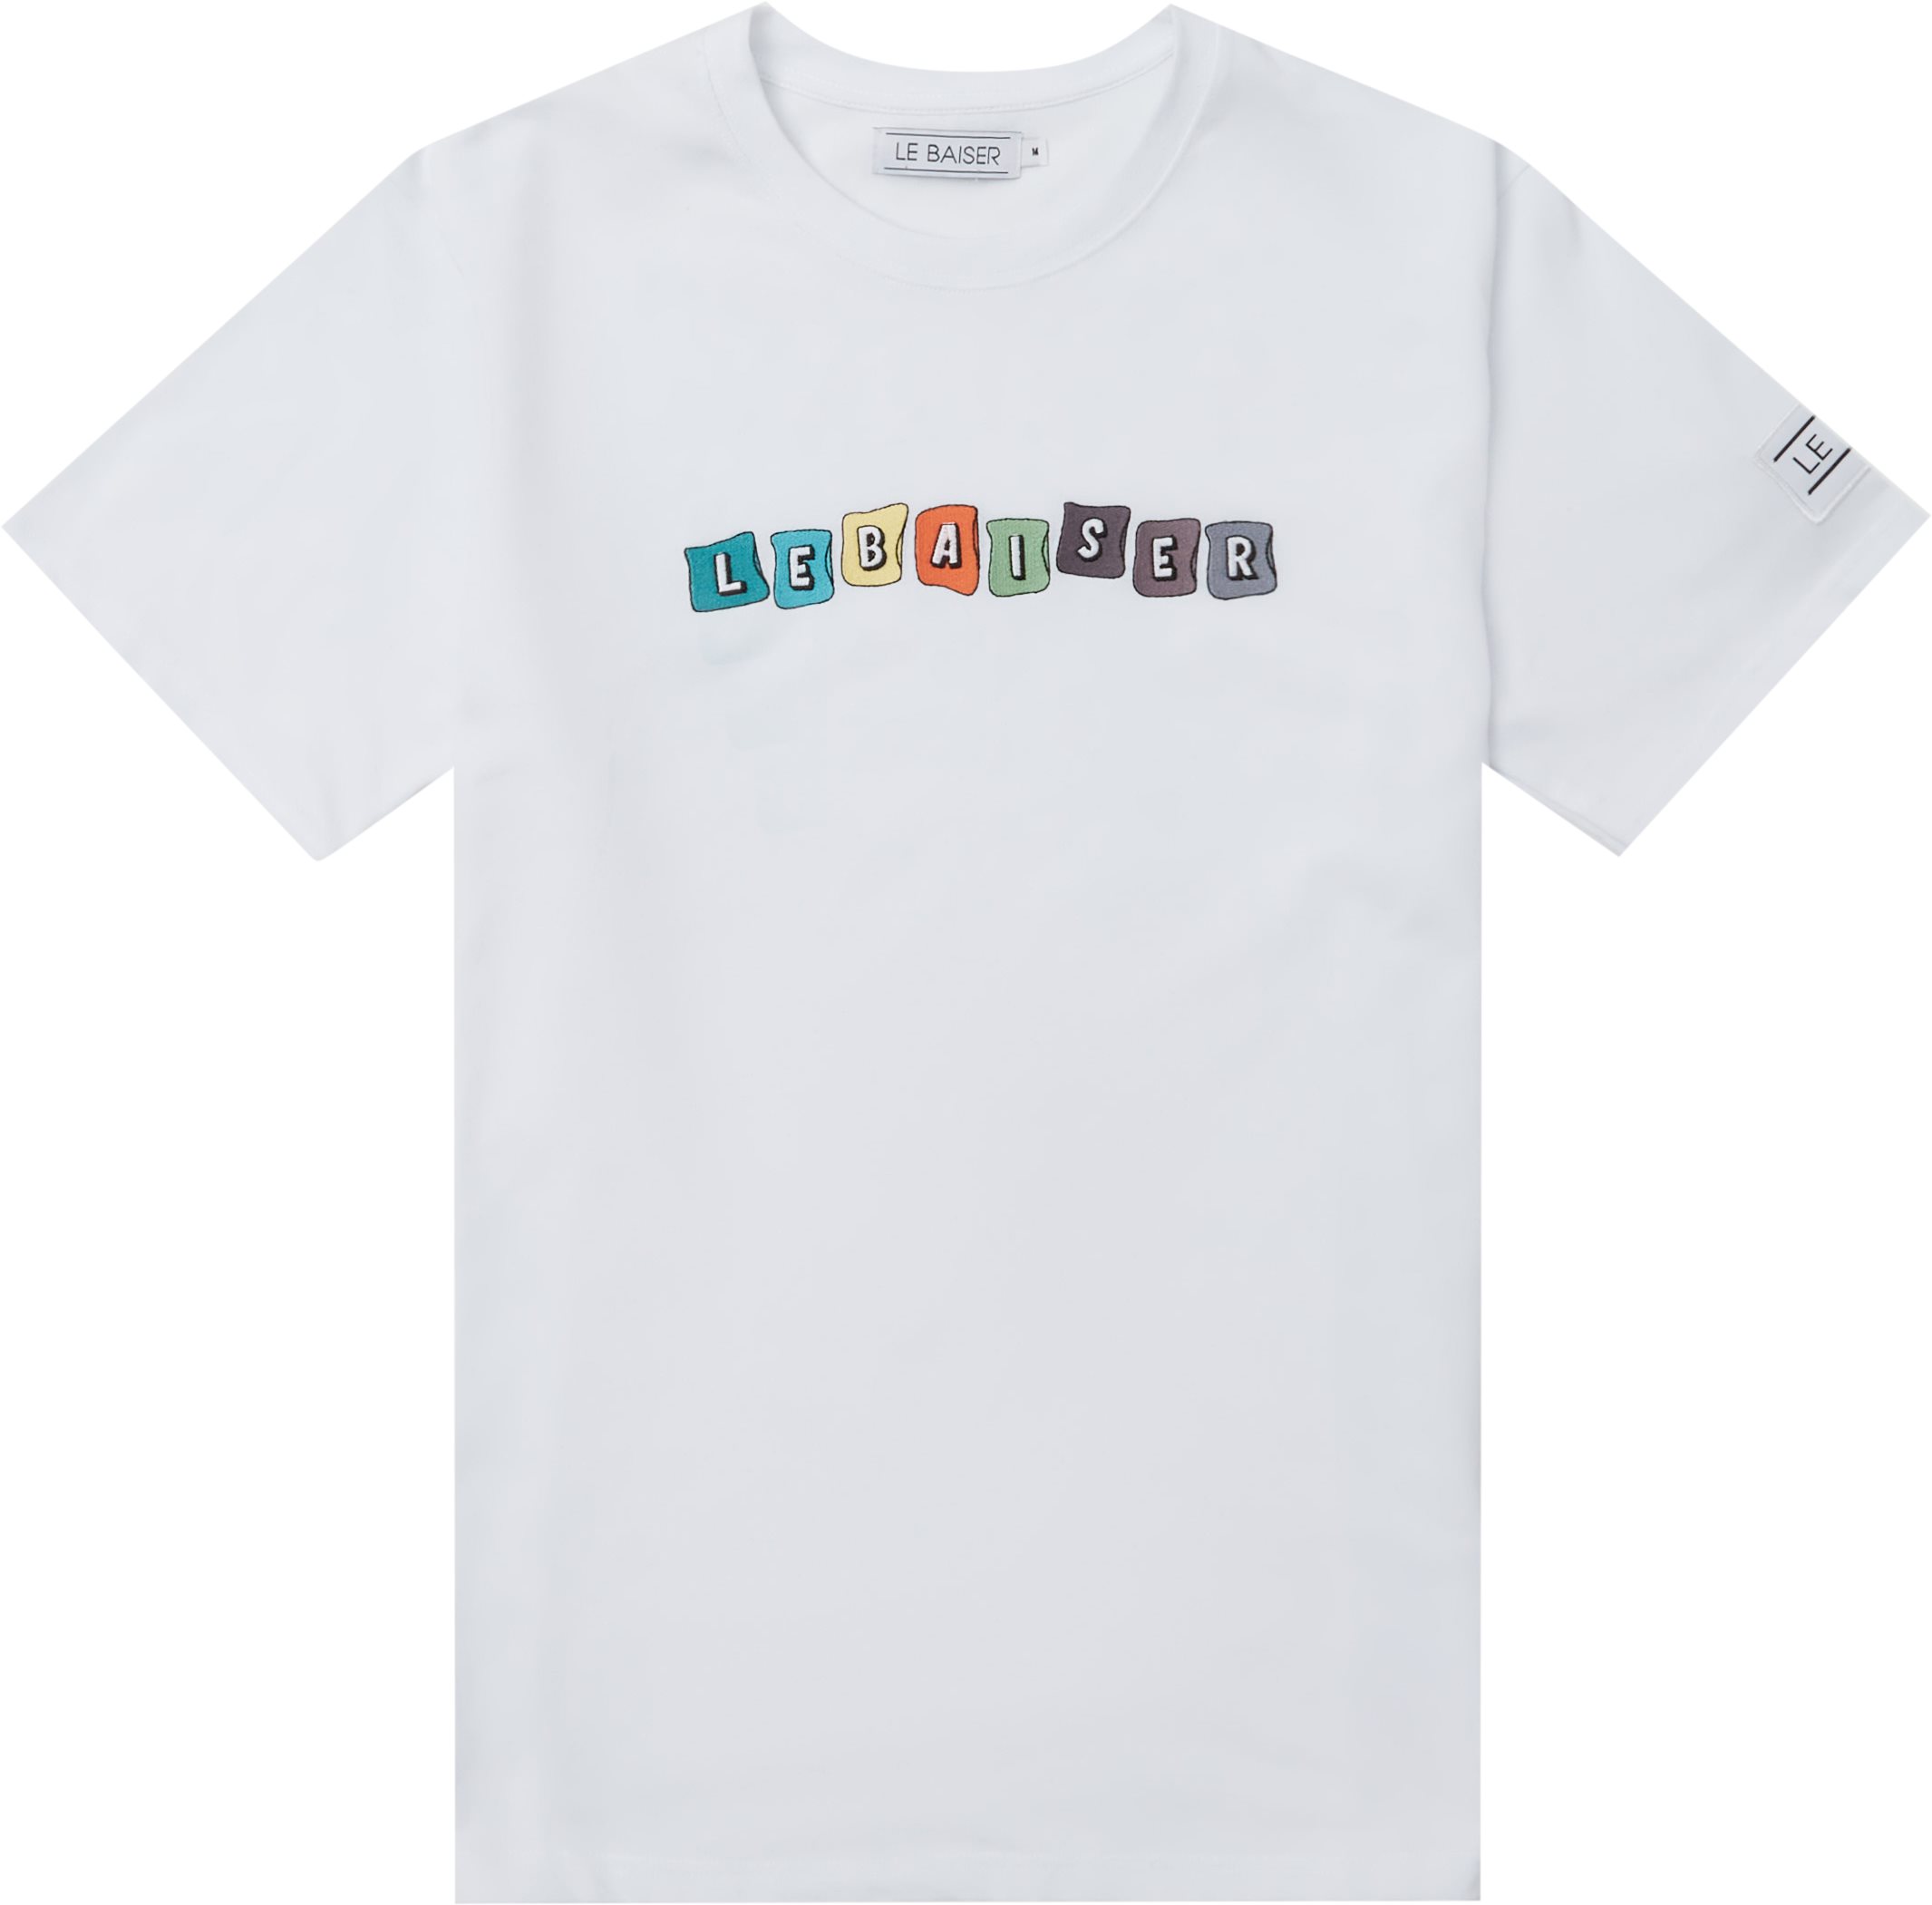 Butre Tee - T-shirts - Regular fit - White